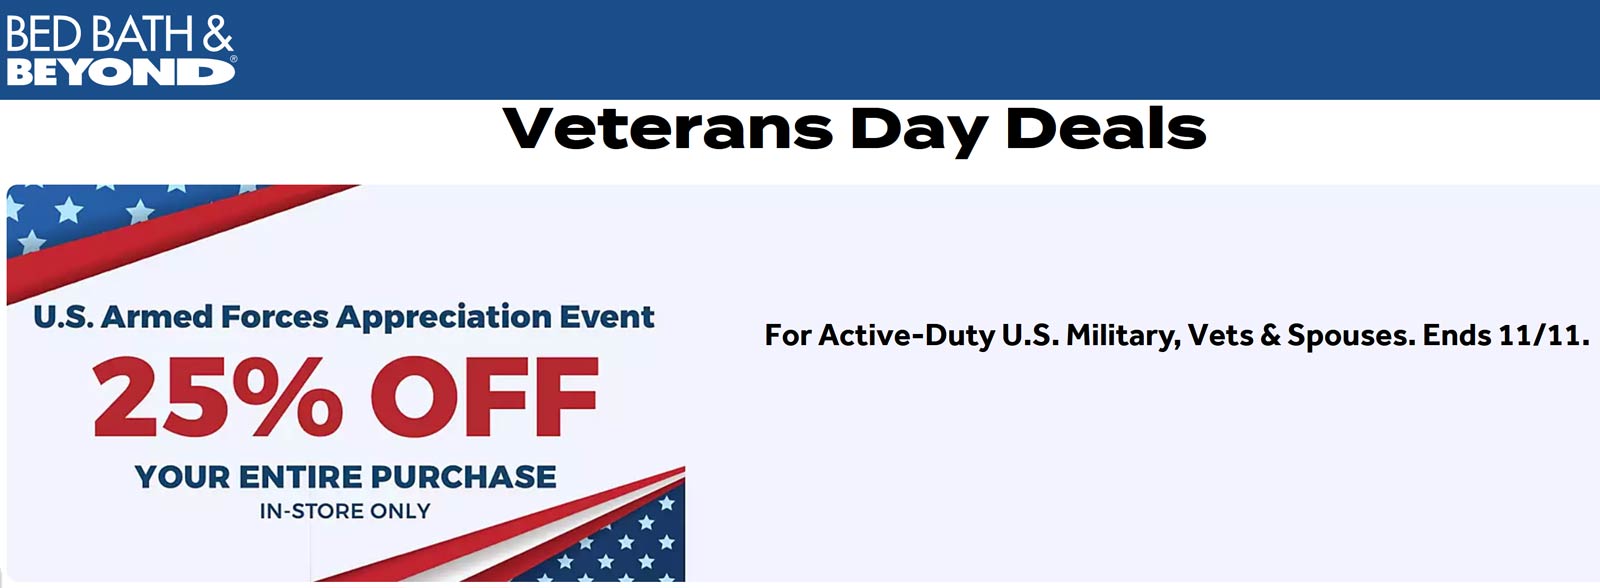 Bed Bath & Beyond stores Coupon  Active vets & spouses enjoy 25% off today at Bed Bath & Beyond #bedbathbeyond 